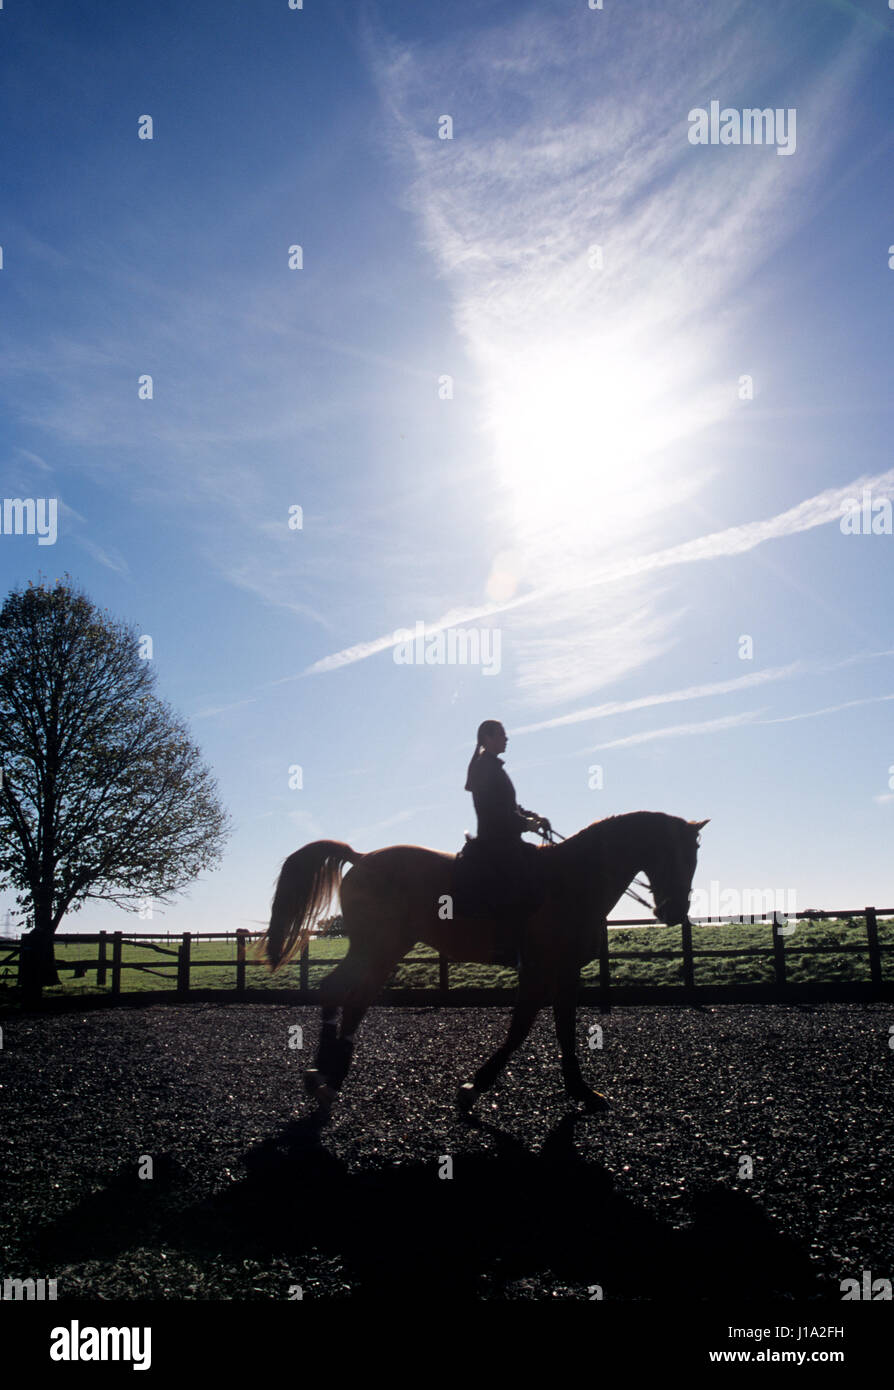 Silhouette of woman riding a horse. Stock Photo